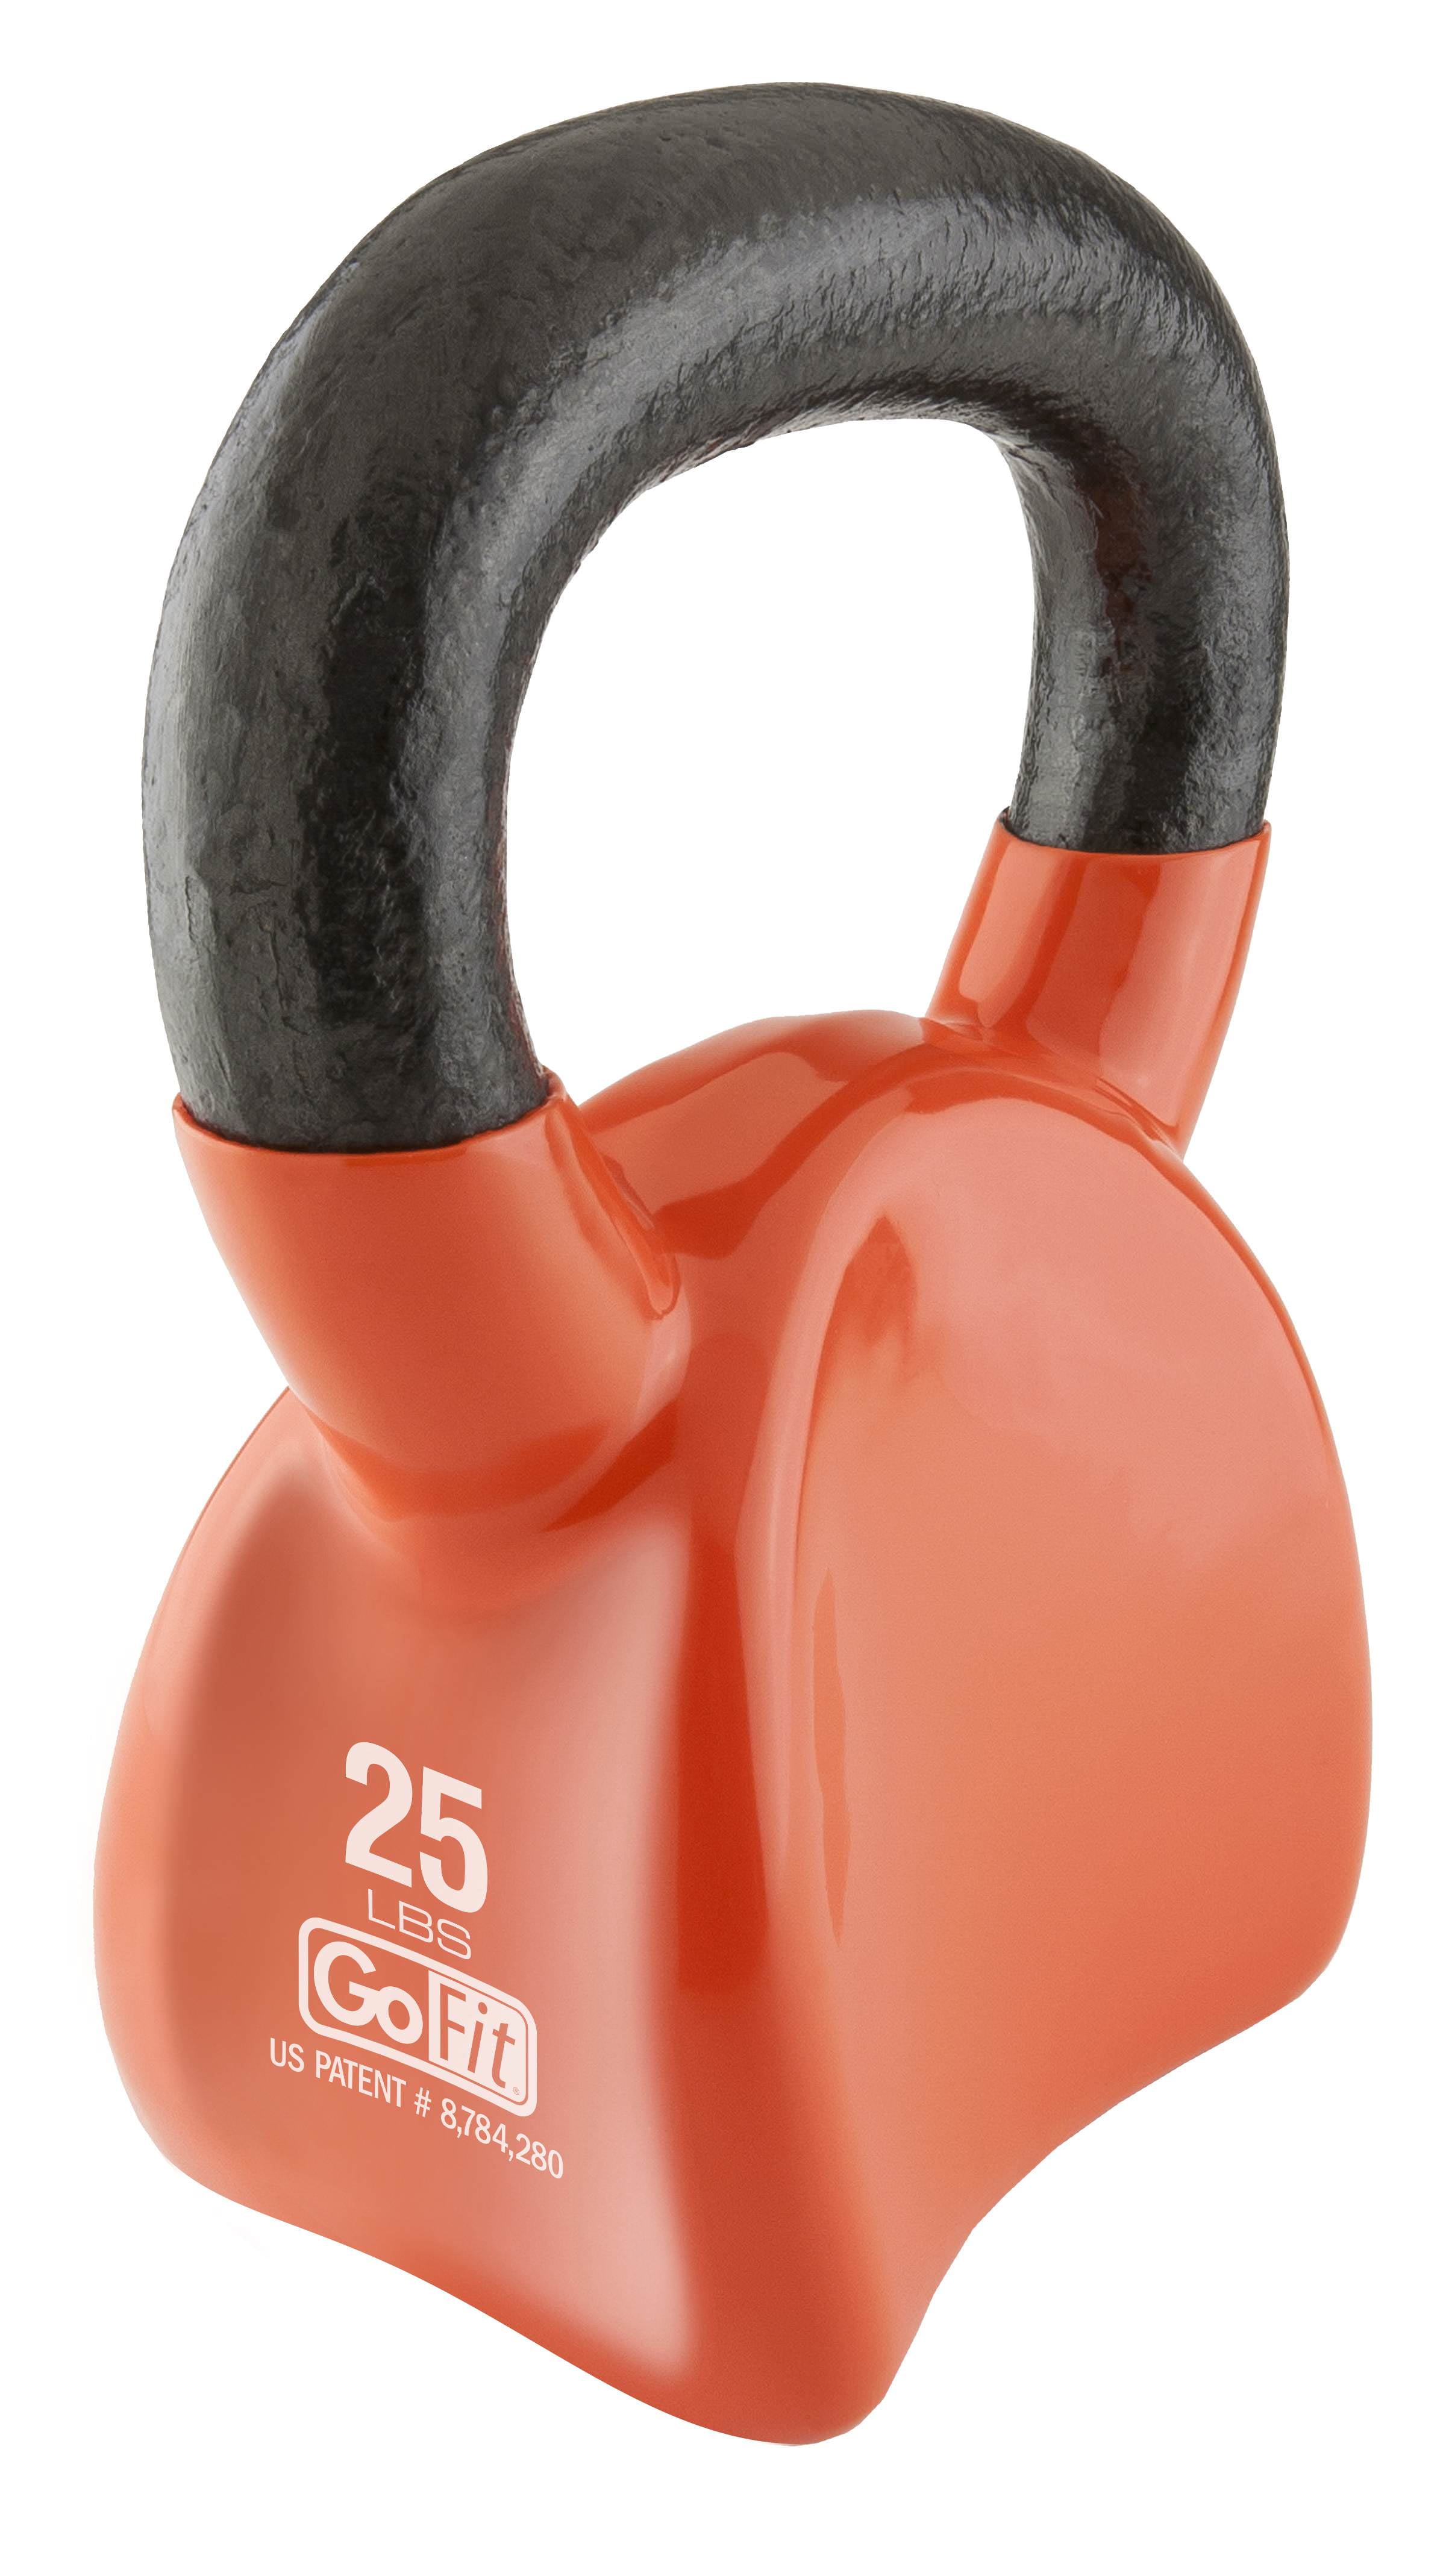 Gym and CrossFit Workouts GoFit Contour Kettlebell Vinyl Coated Premium Kettle bell Home for Exercise